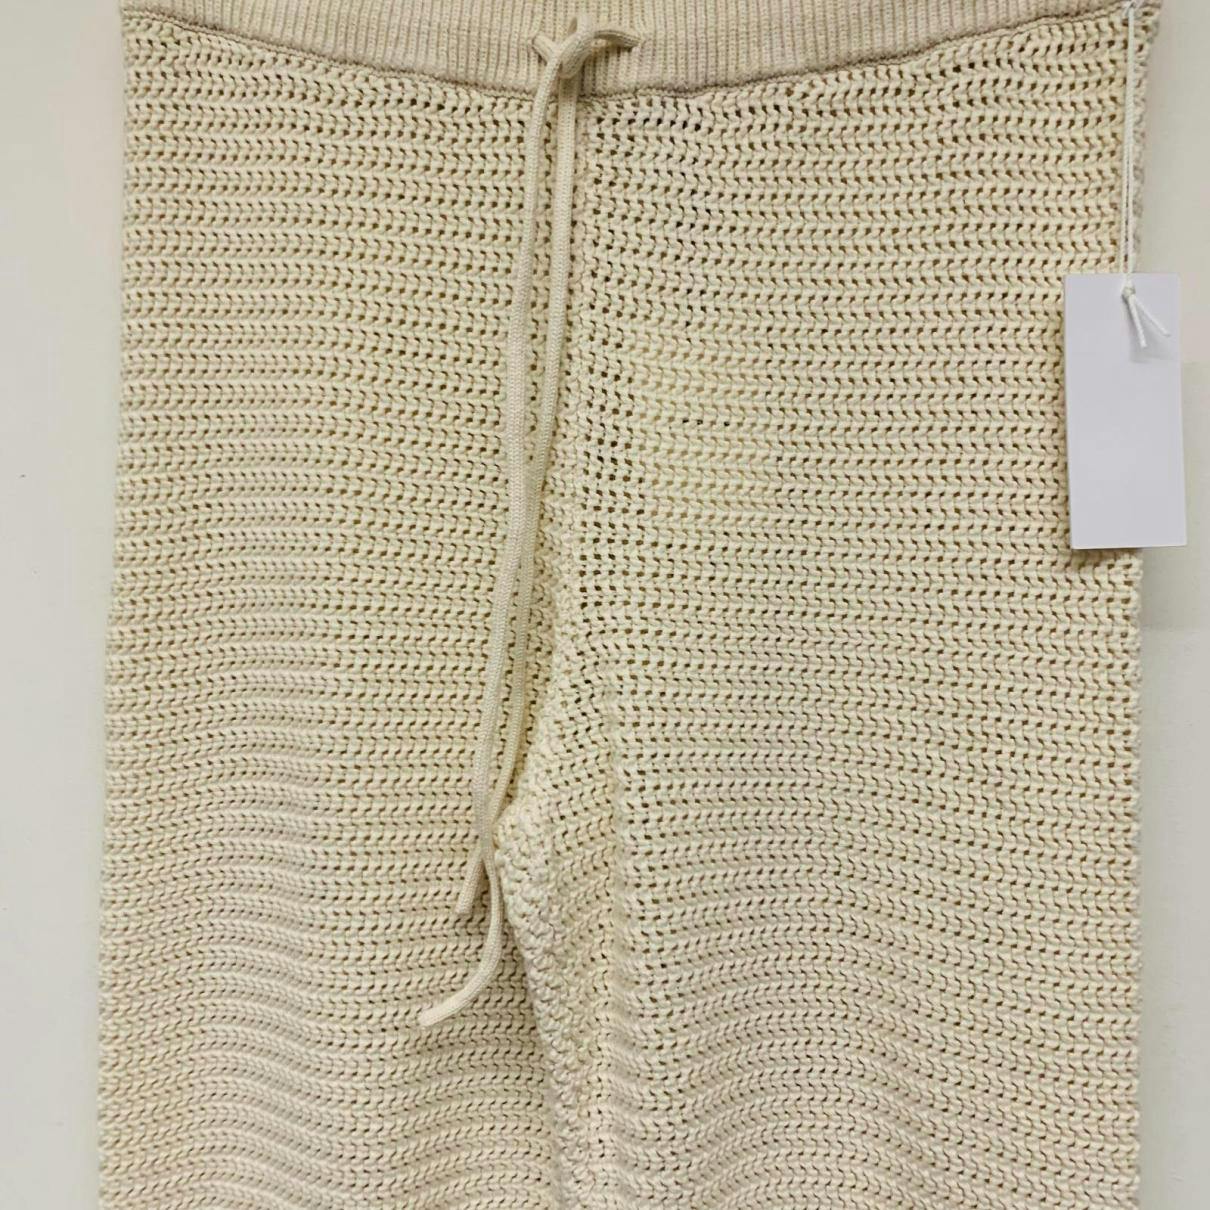 https://images.vestiairecollective.com/cdn-cgi/image/q=75,f=auto,/produit/white-synthetic-reformation-trousers-35136158-6_2.jpg?secret=VC-e9eee96a-a819-4431-ad12-d066be2626ef